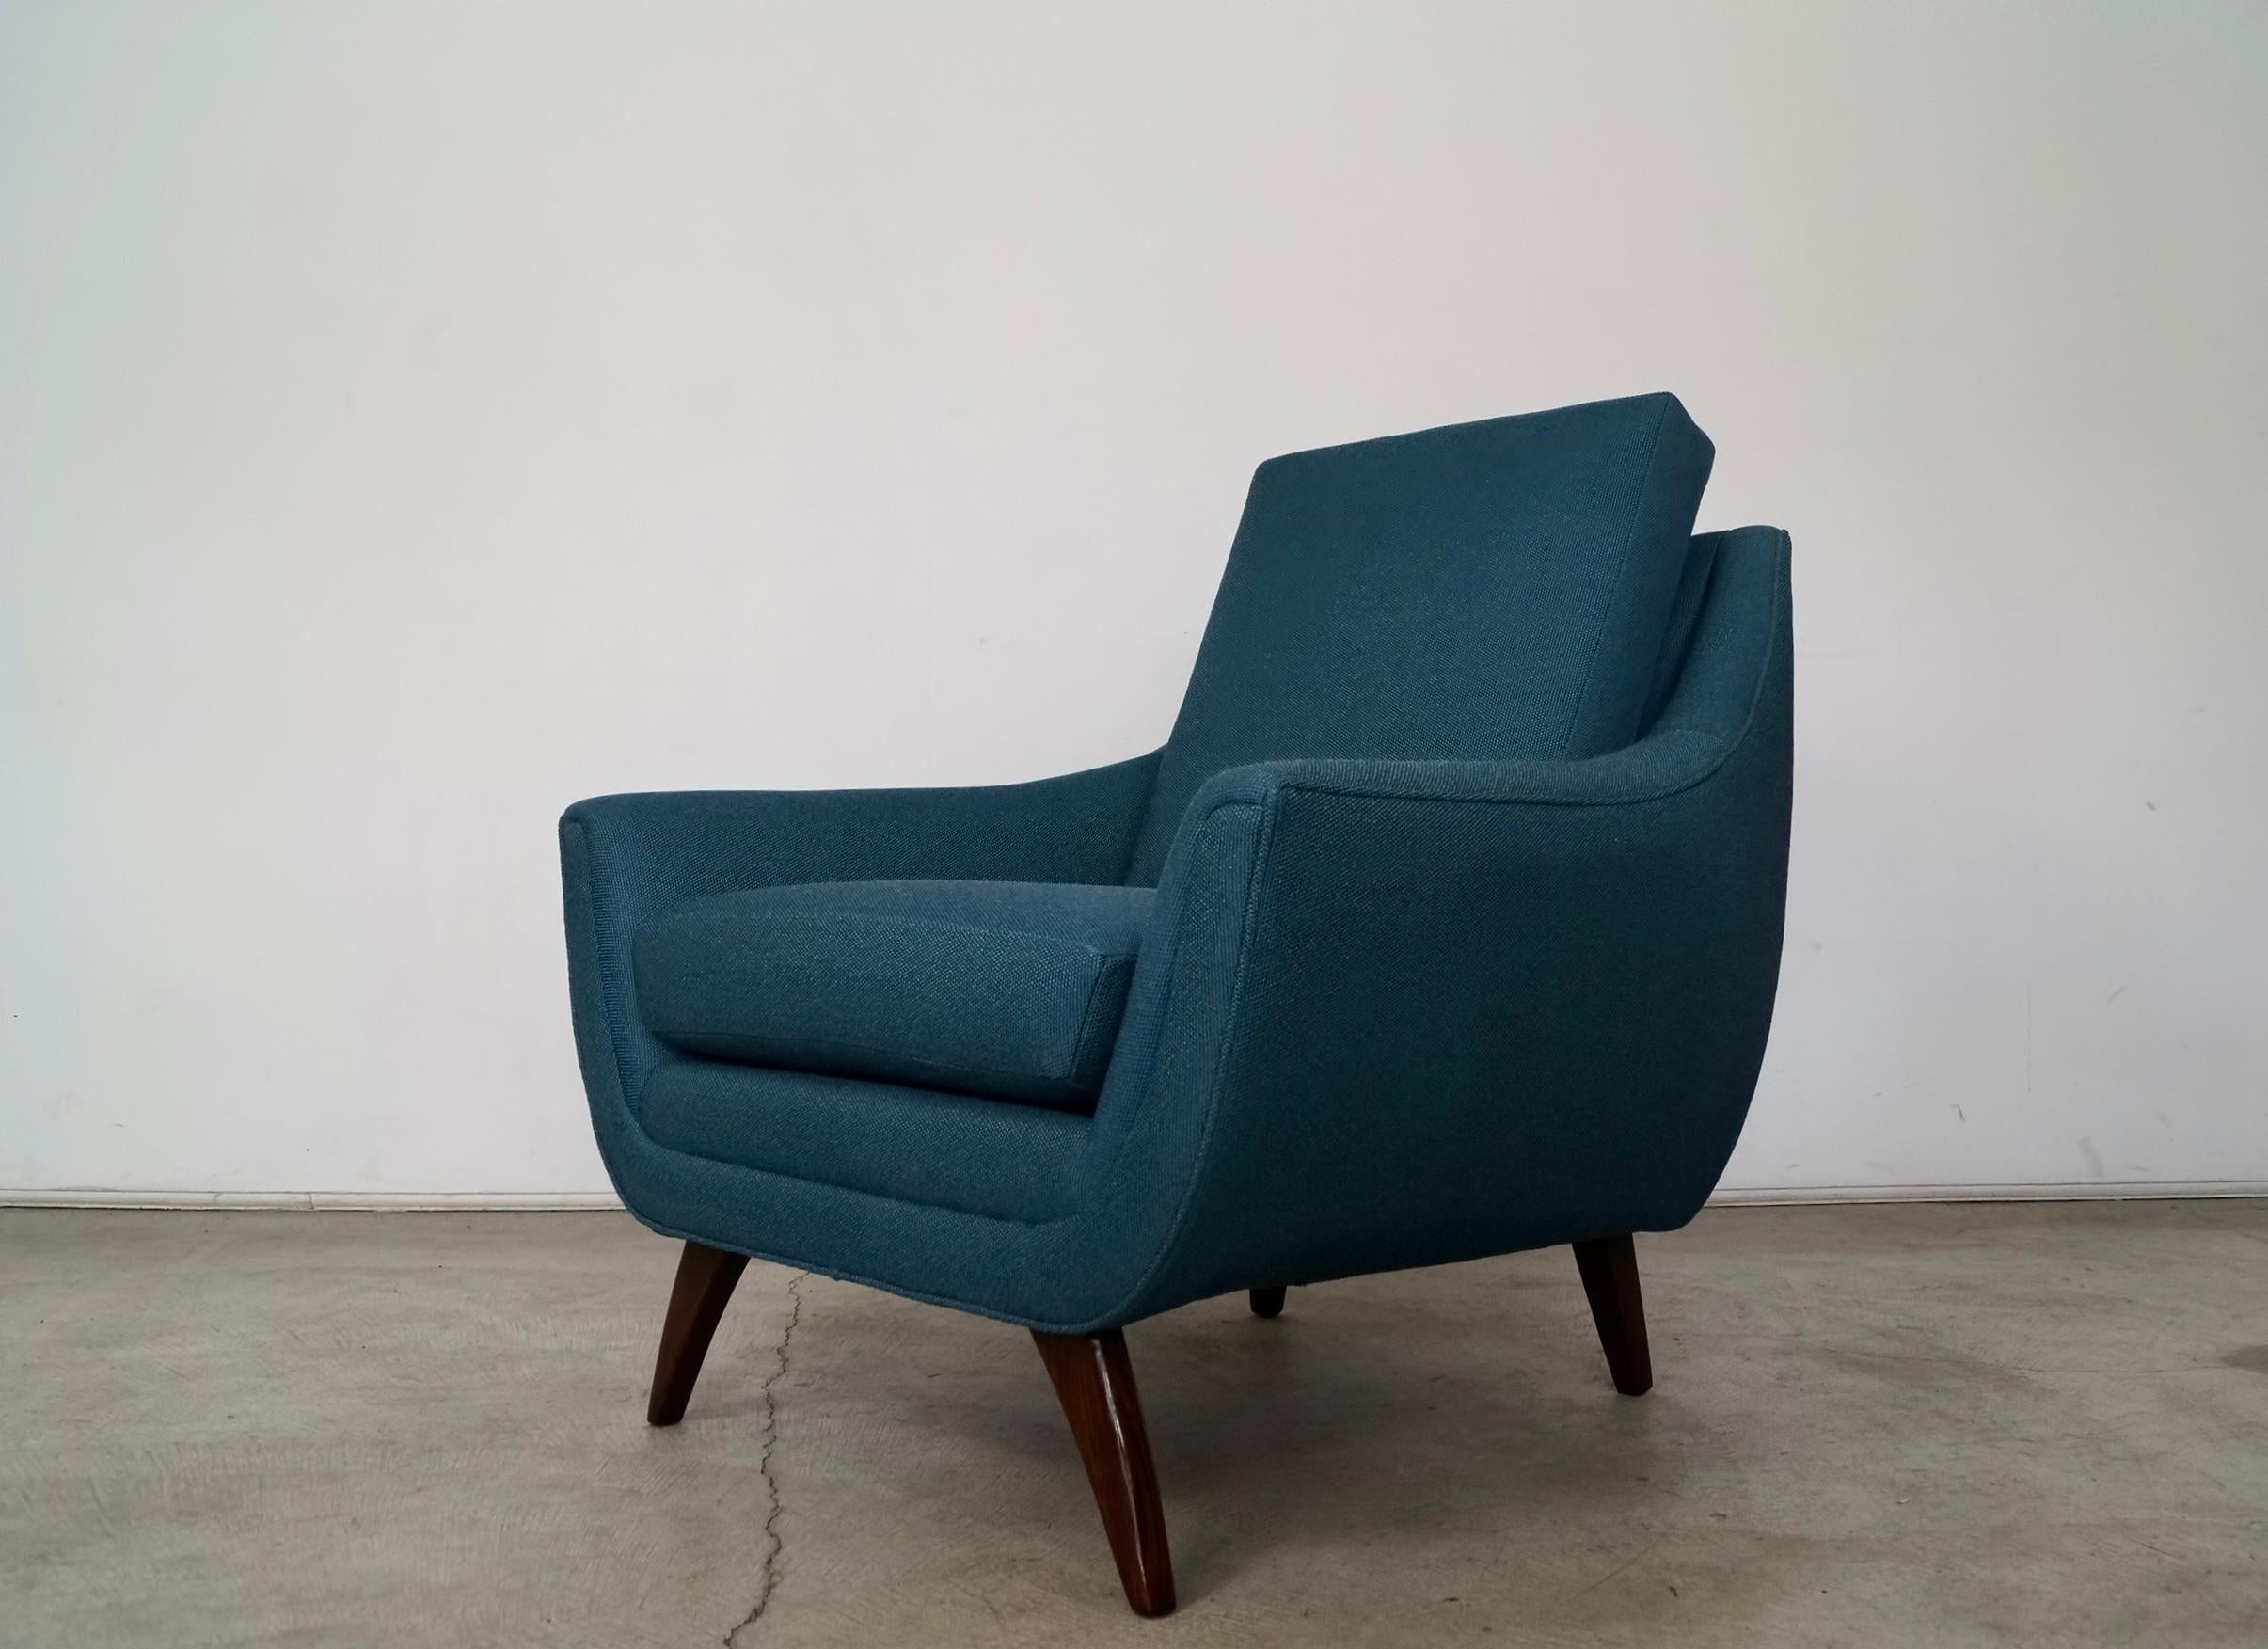 American 1960's Mid-Century Modern Adrian Pearsall Style Prestige Gondola Lounge Chair For Sale